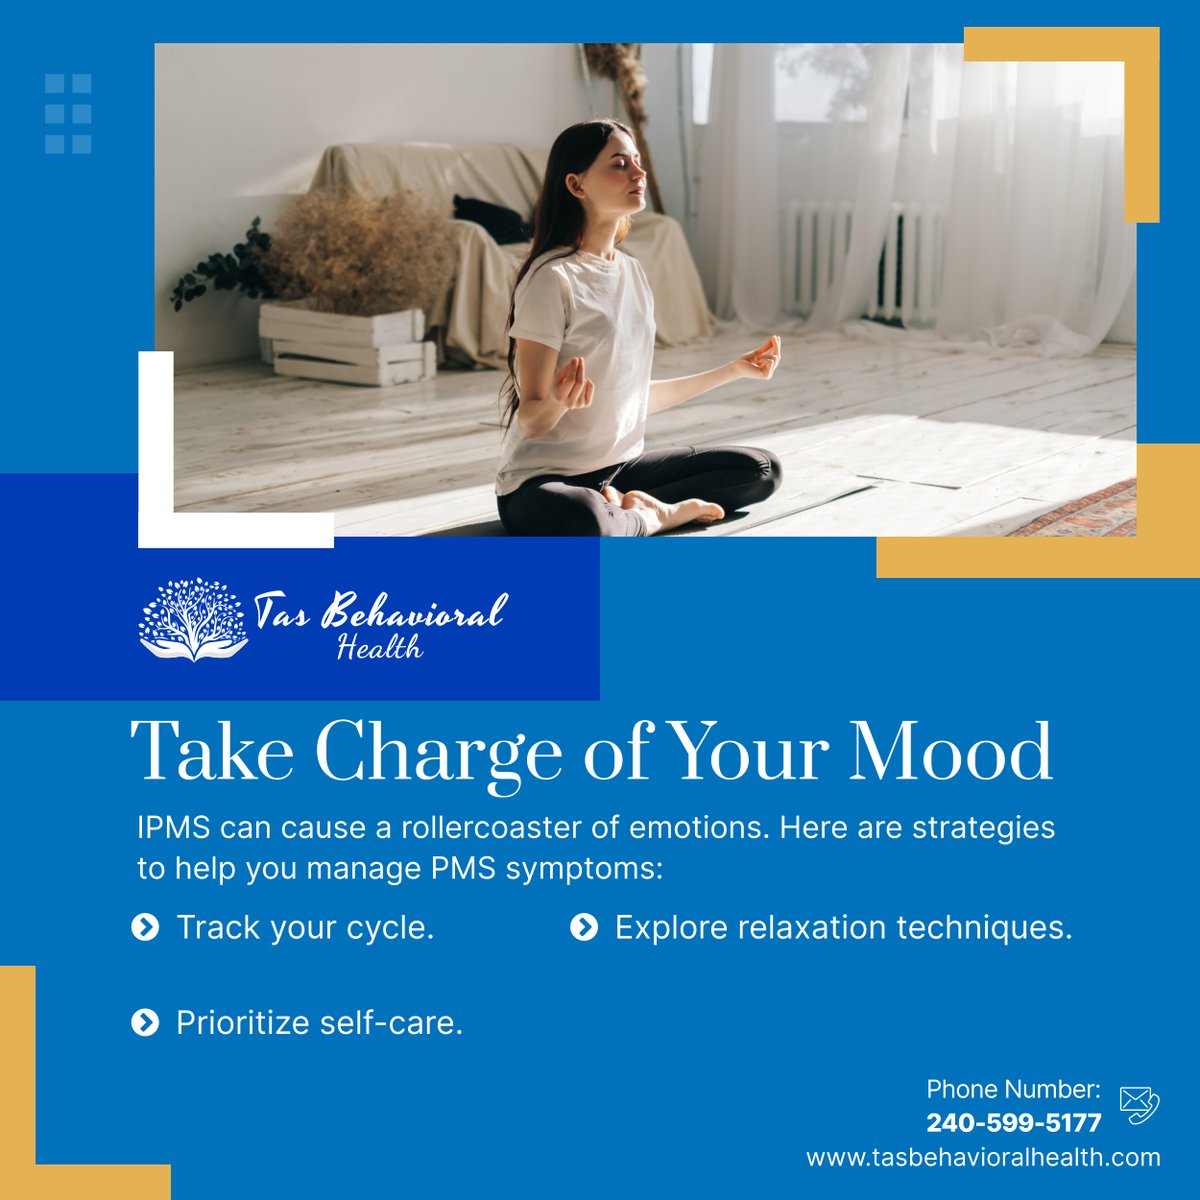 Feeling overwhelmed by Premenstrual Syndrome (PMS)? You're not alone. These strategies can help you take control of your mood and navigate your cycle with confidence. #CumberlandMD #MentalHealthClinic #PMS